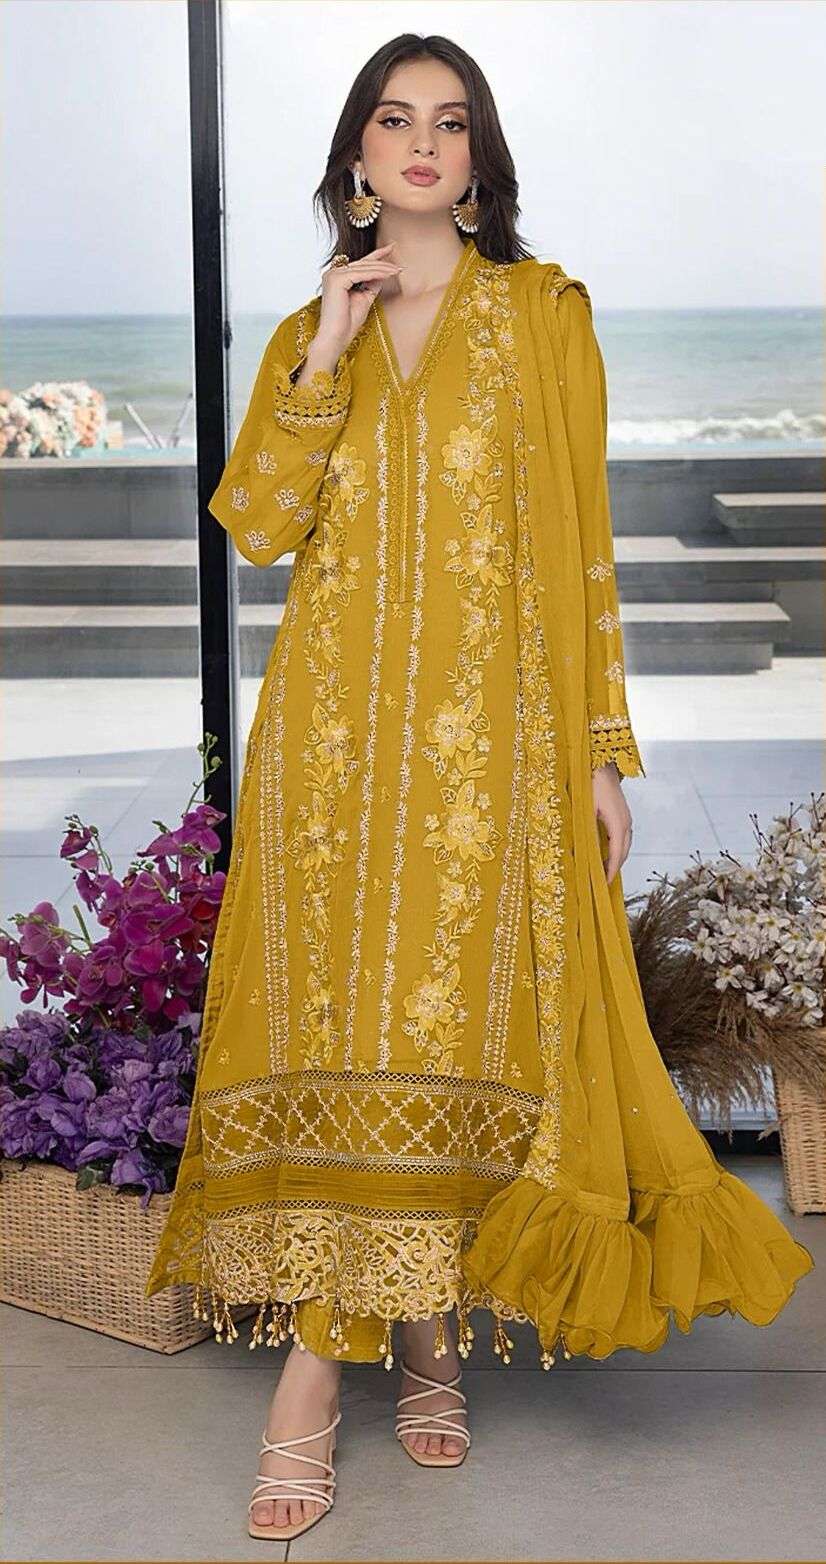 Bilqis B 03 E To H Georgette Embroidered Pakistani Suits Wholesale catalog